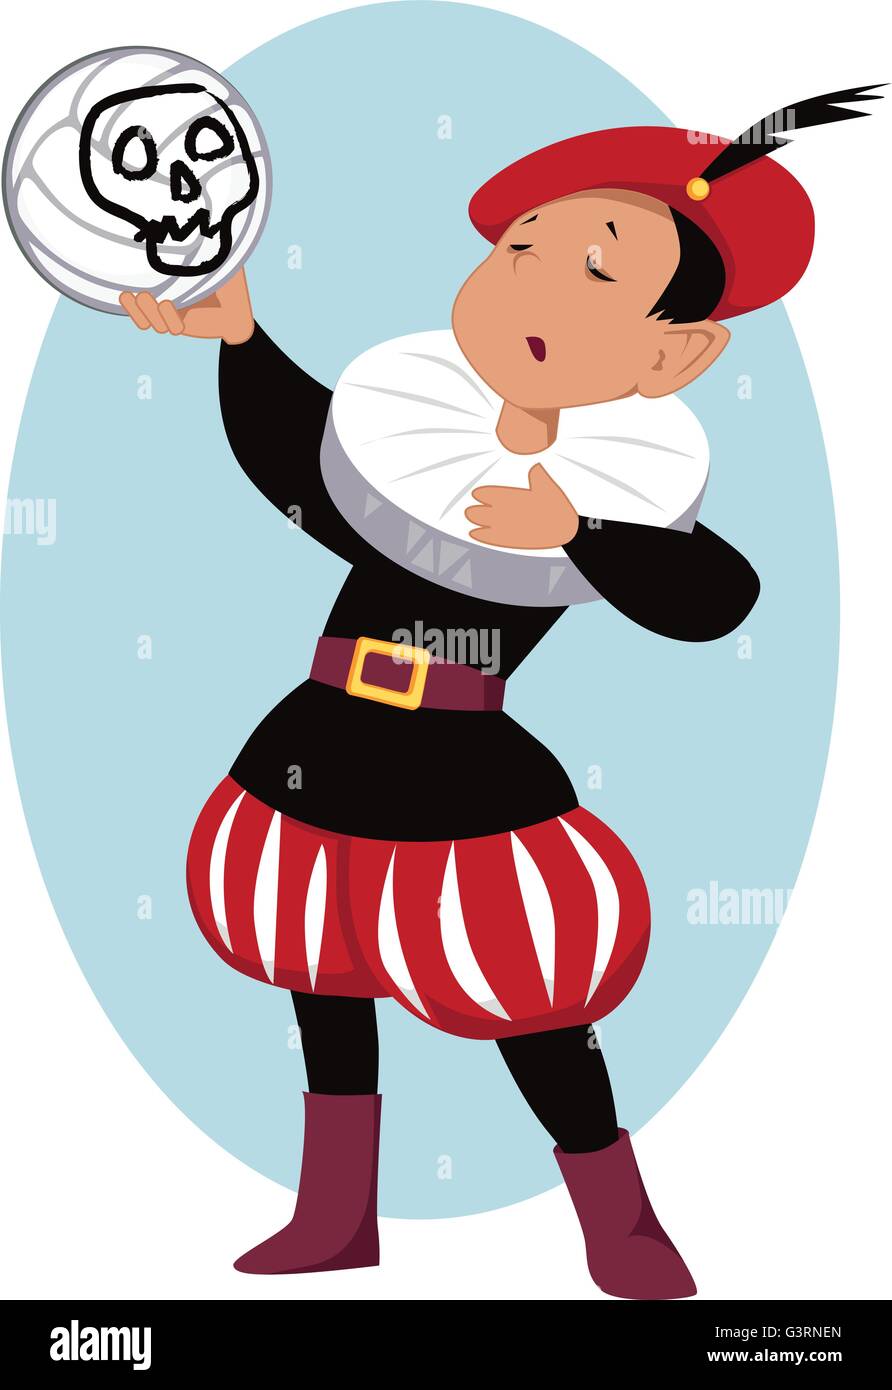 Little boy playing Hamlet in a school play, holding a volleyball with a scull painted on it Stock Vector